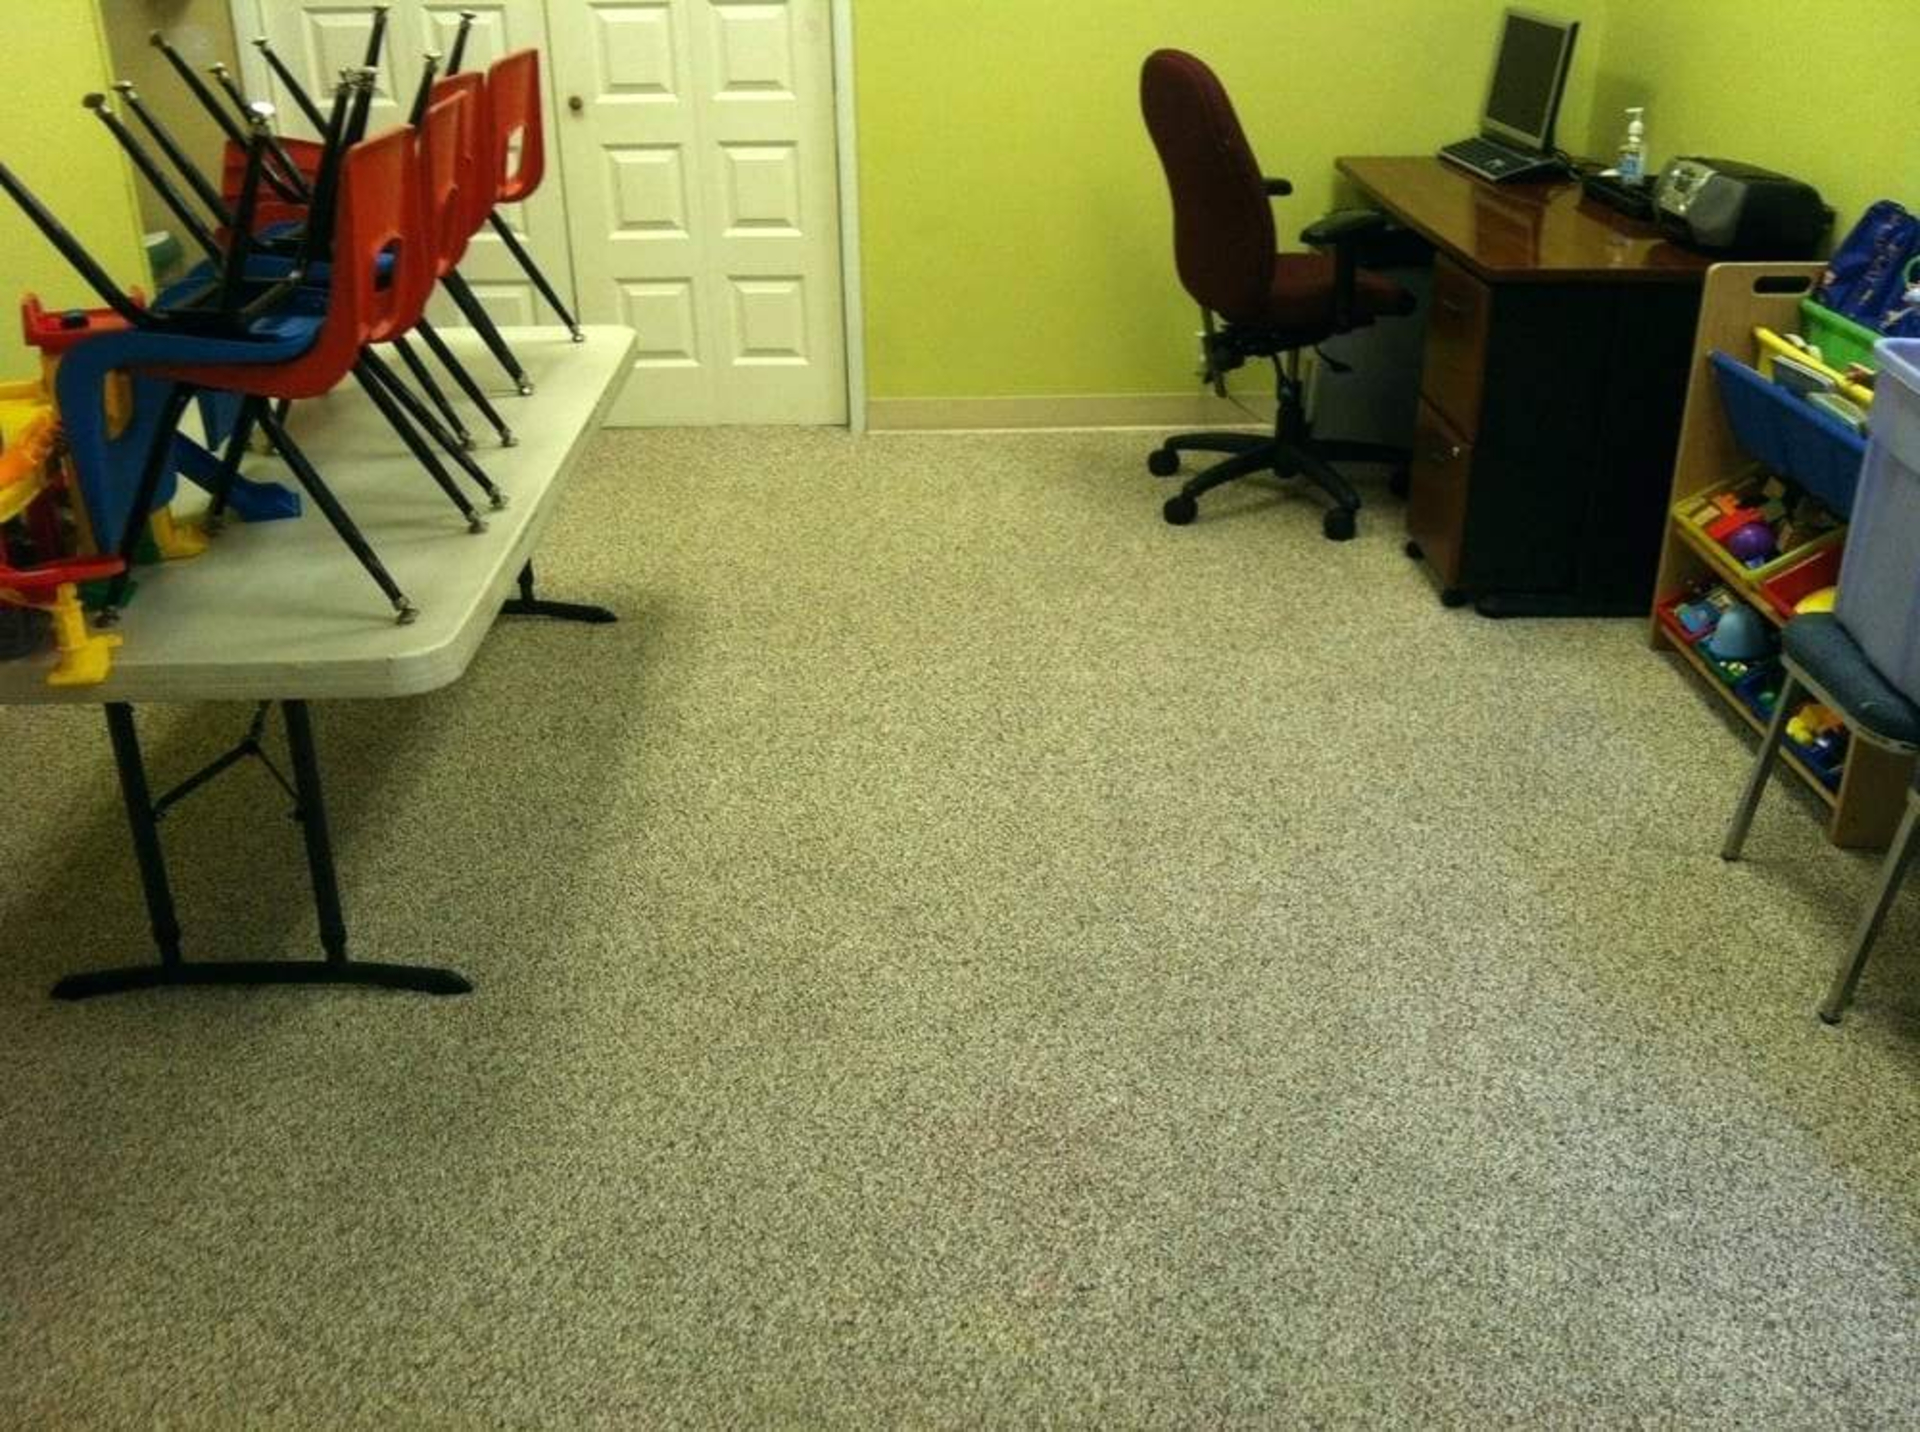 Other Methods Orange County Carpet Cleaning Wants To Share image